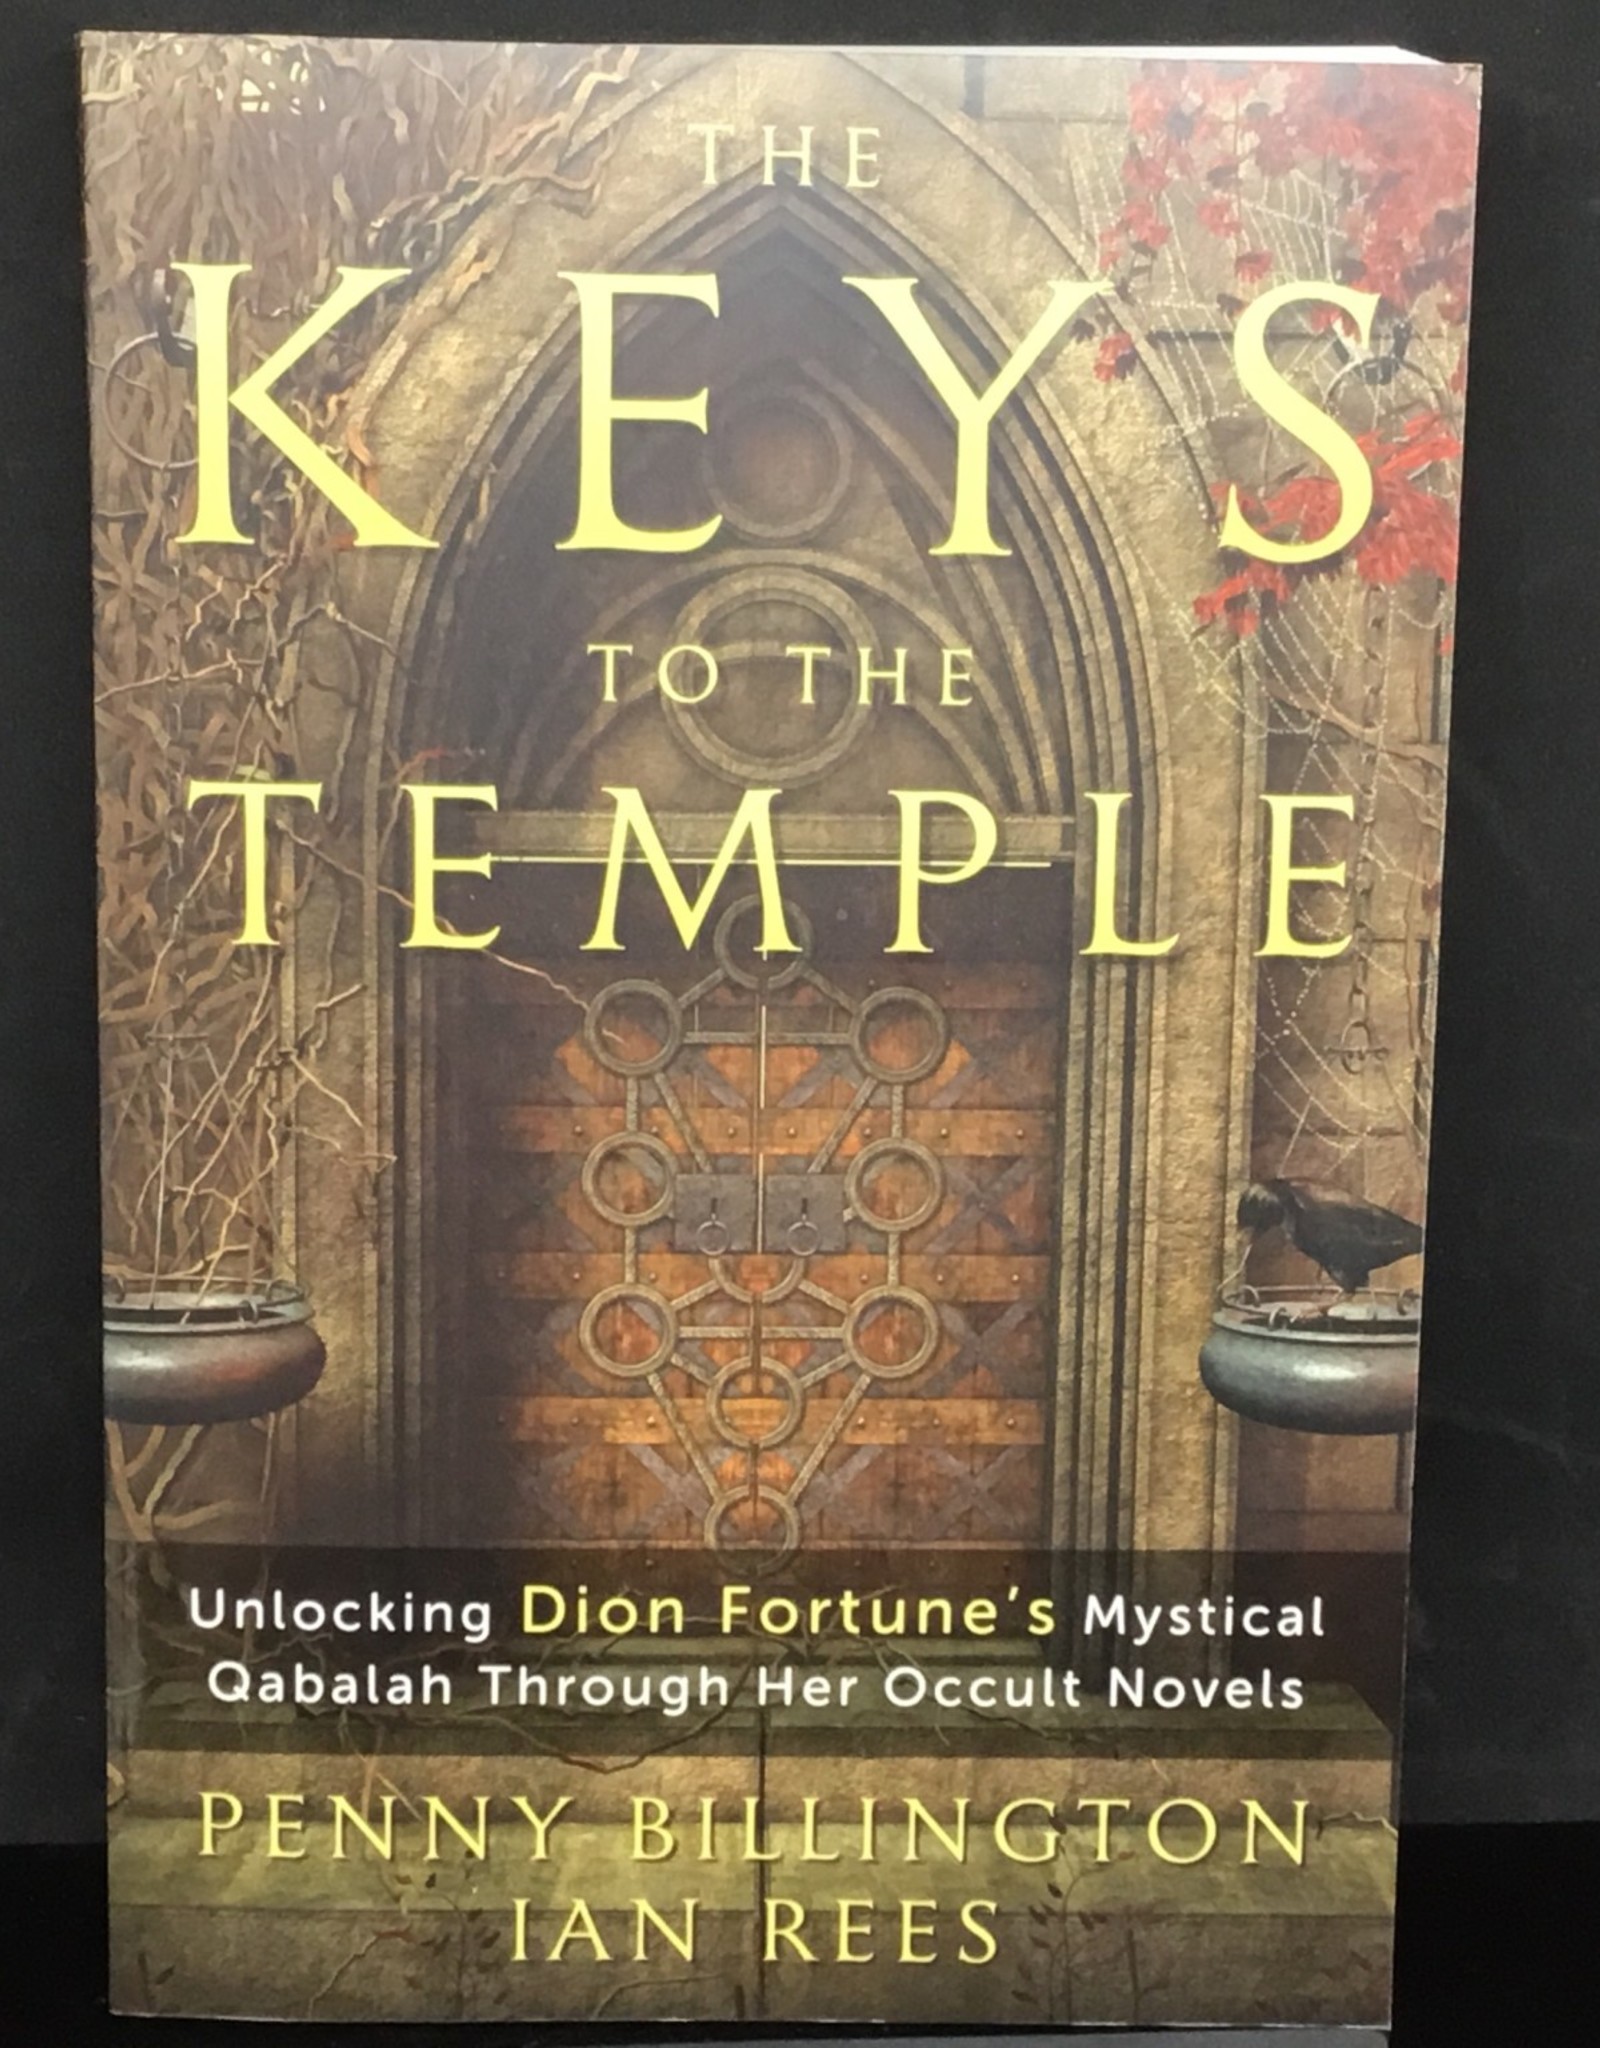 Keys to the Temple